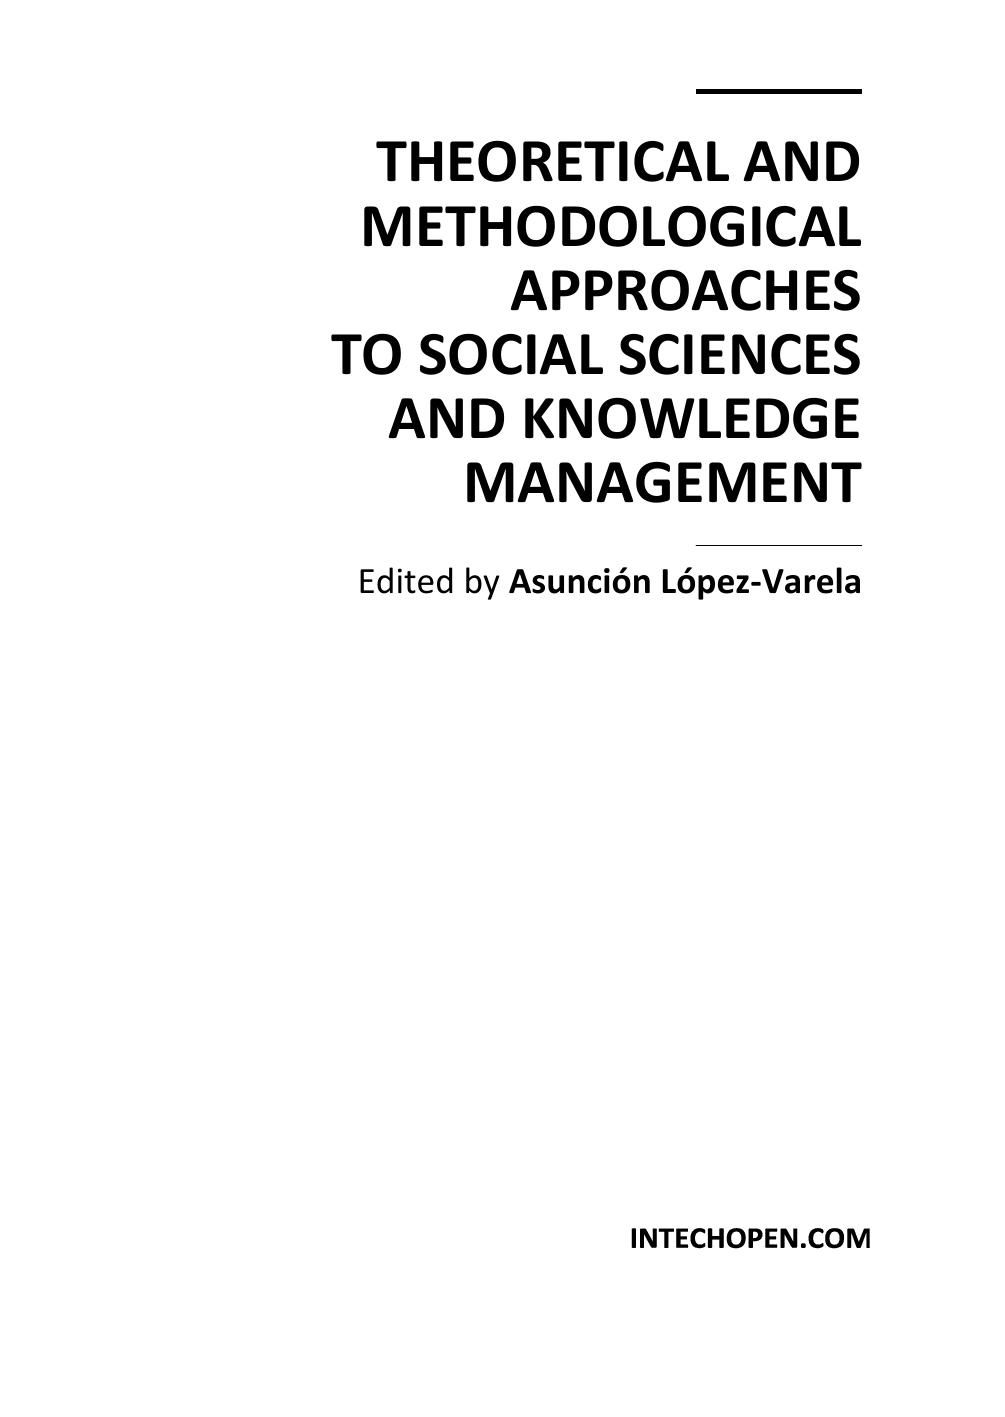 Theoretical and Methodological Approaches to Social Sciences and Knowledge Management 2012.pdf